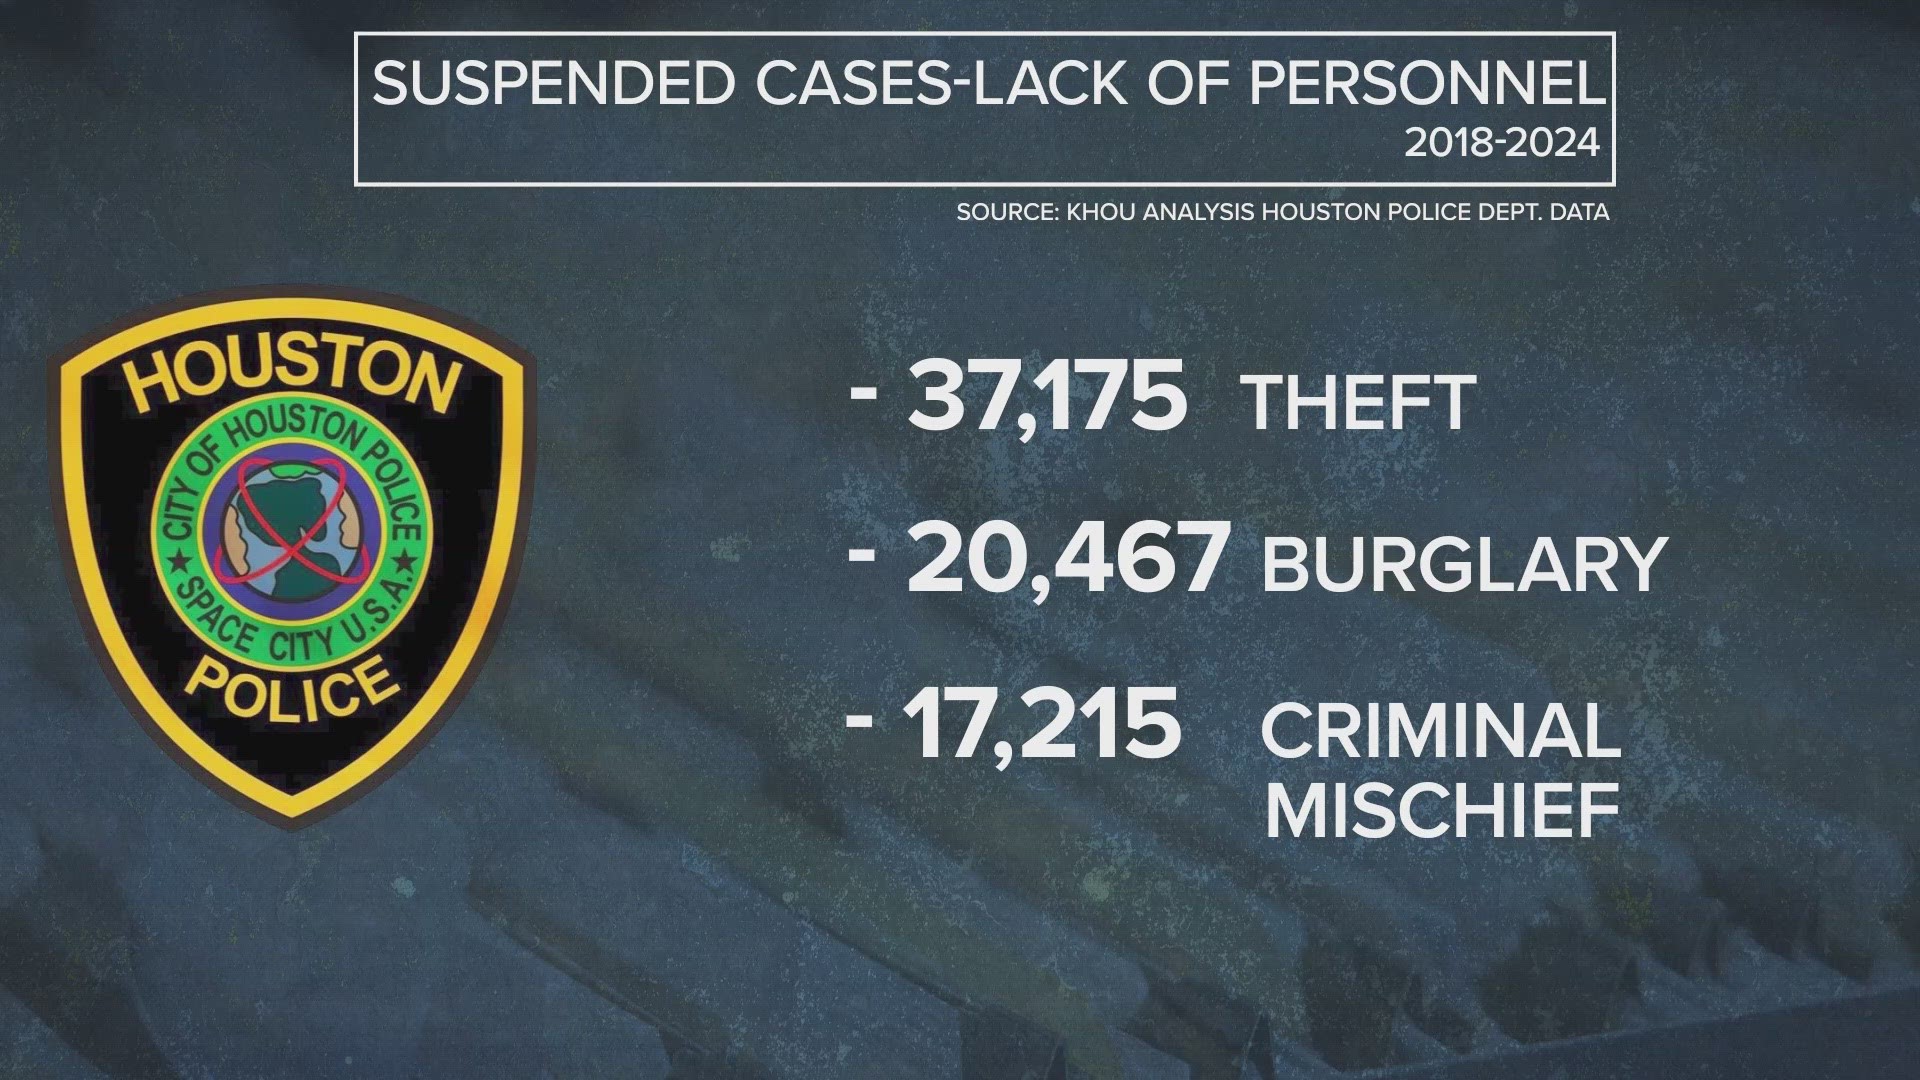 KHOU 11 Investigates obtained a database of the 264,000 suspended crime reports.